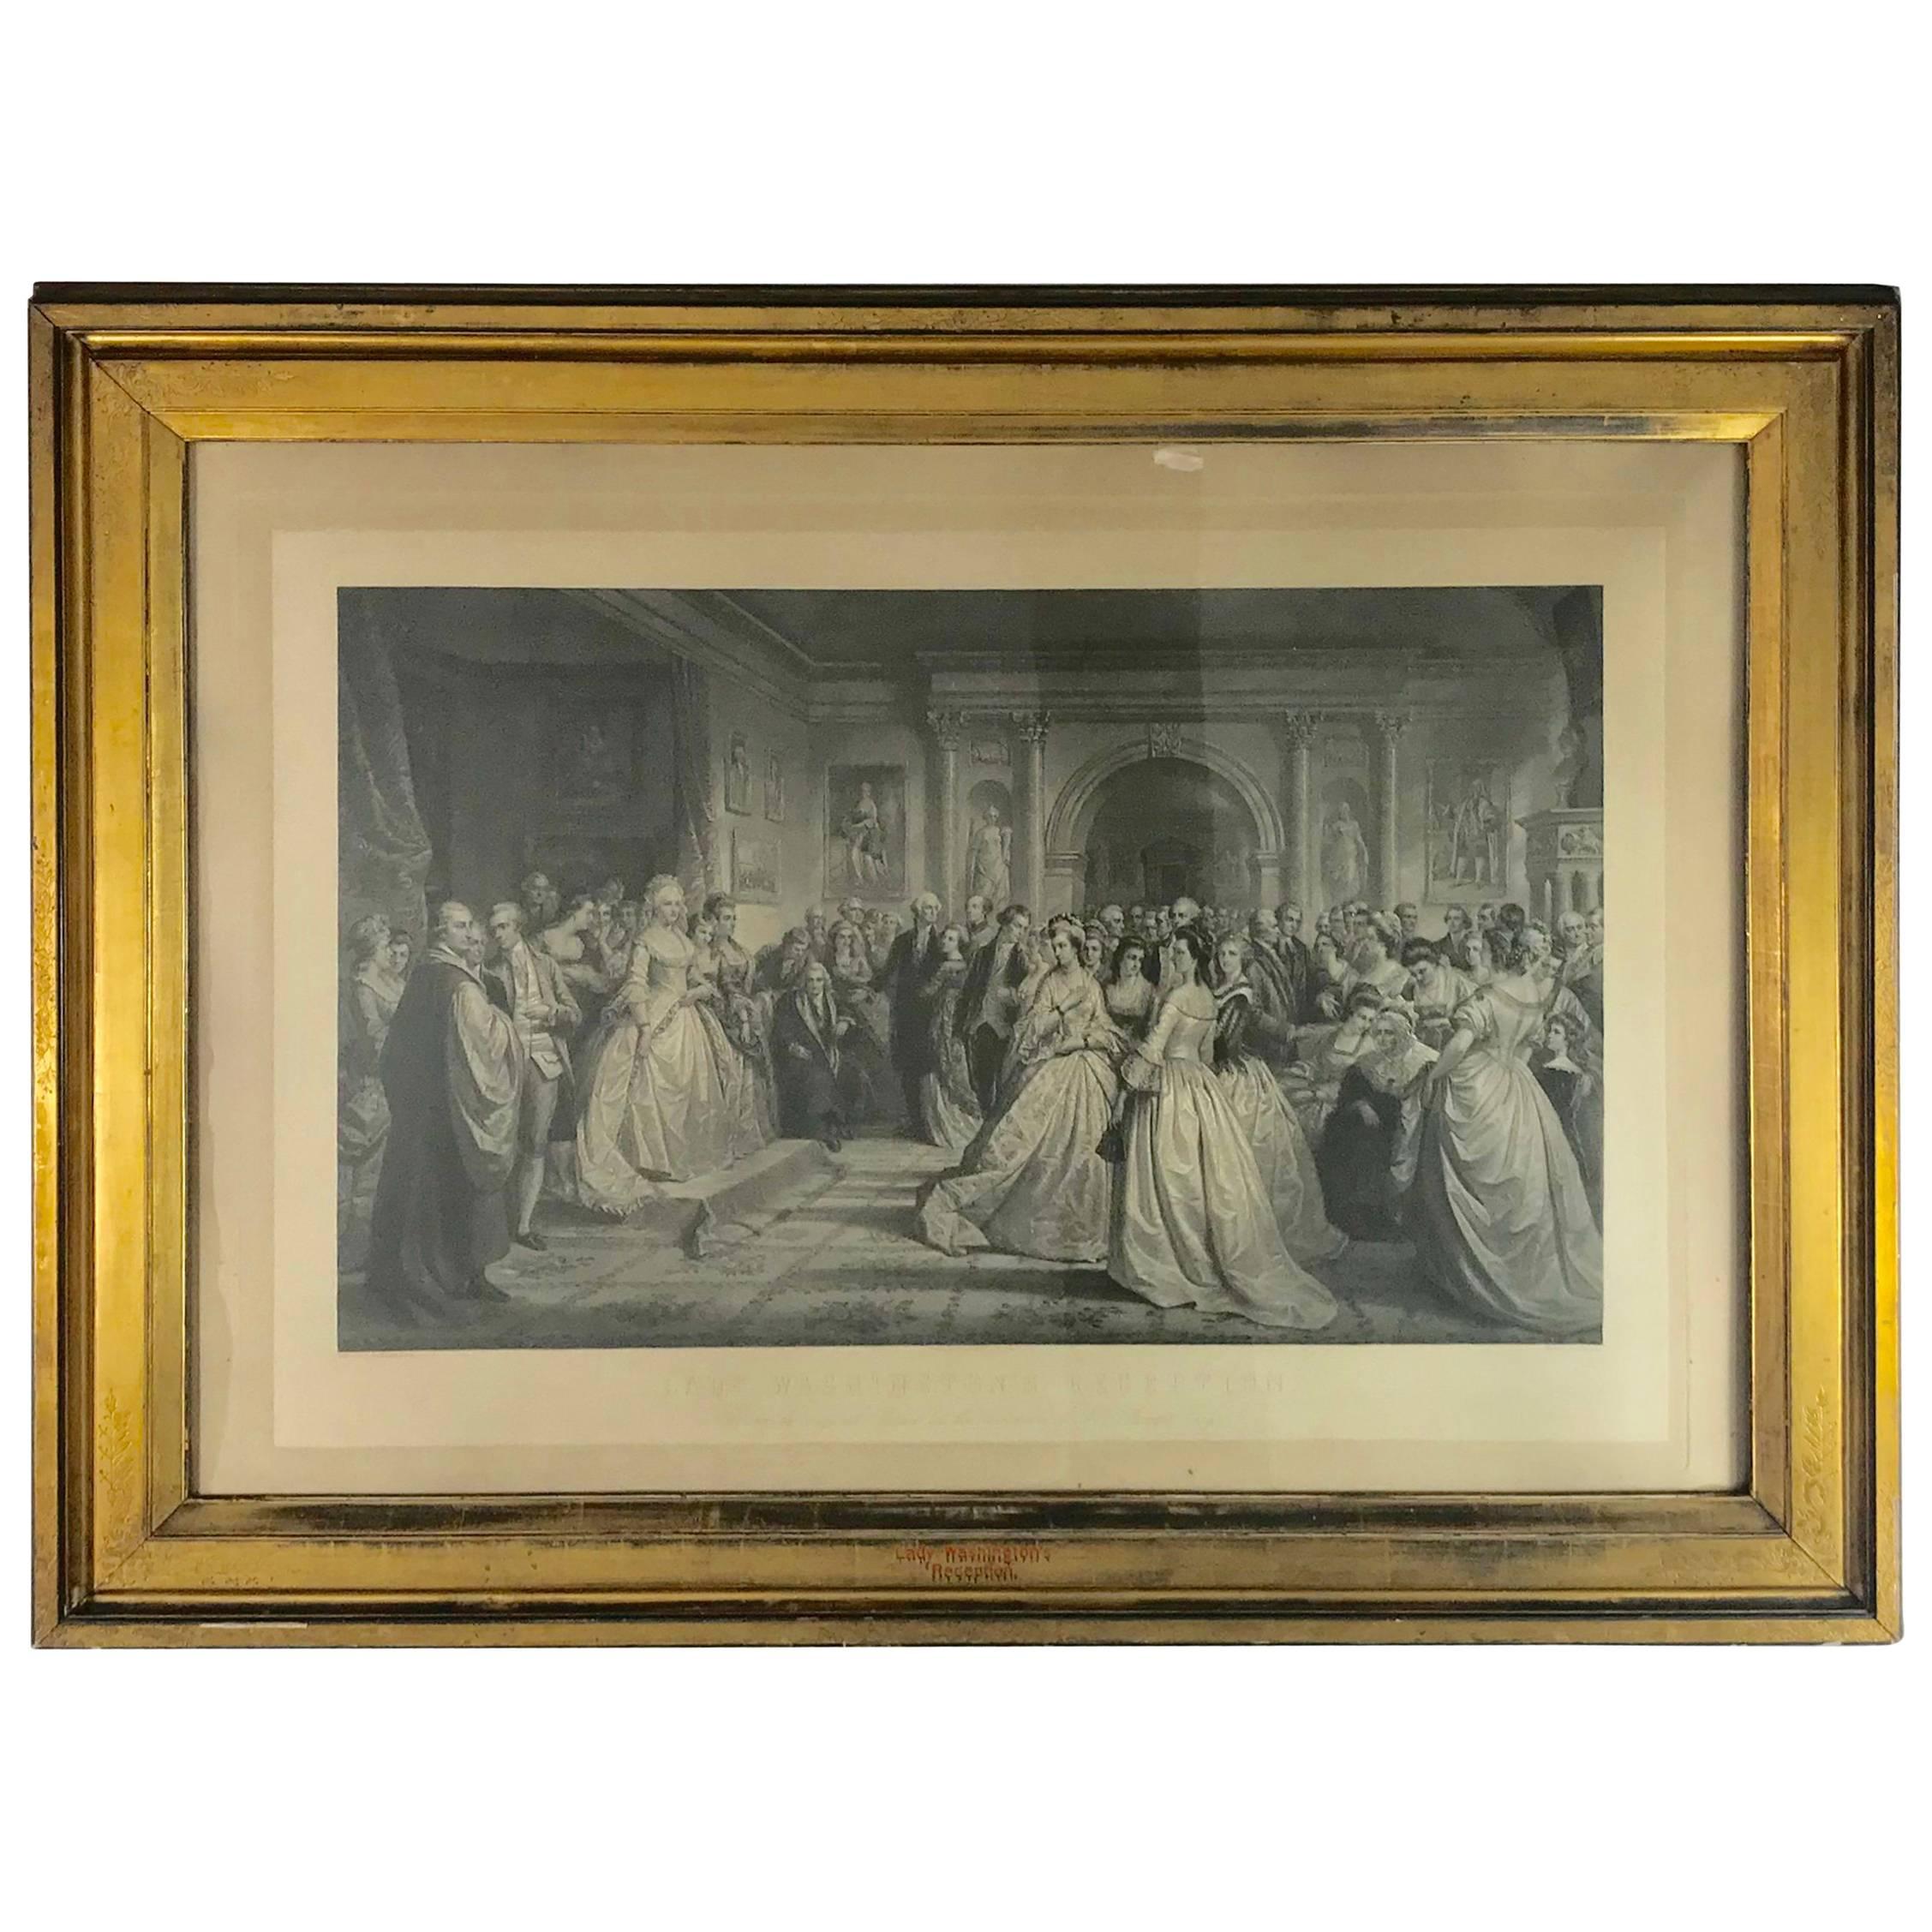 Stunning Antique "Lady Washington's Reception Day" Engraving by A. H. Ritchie